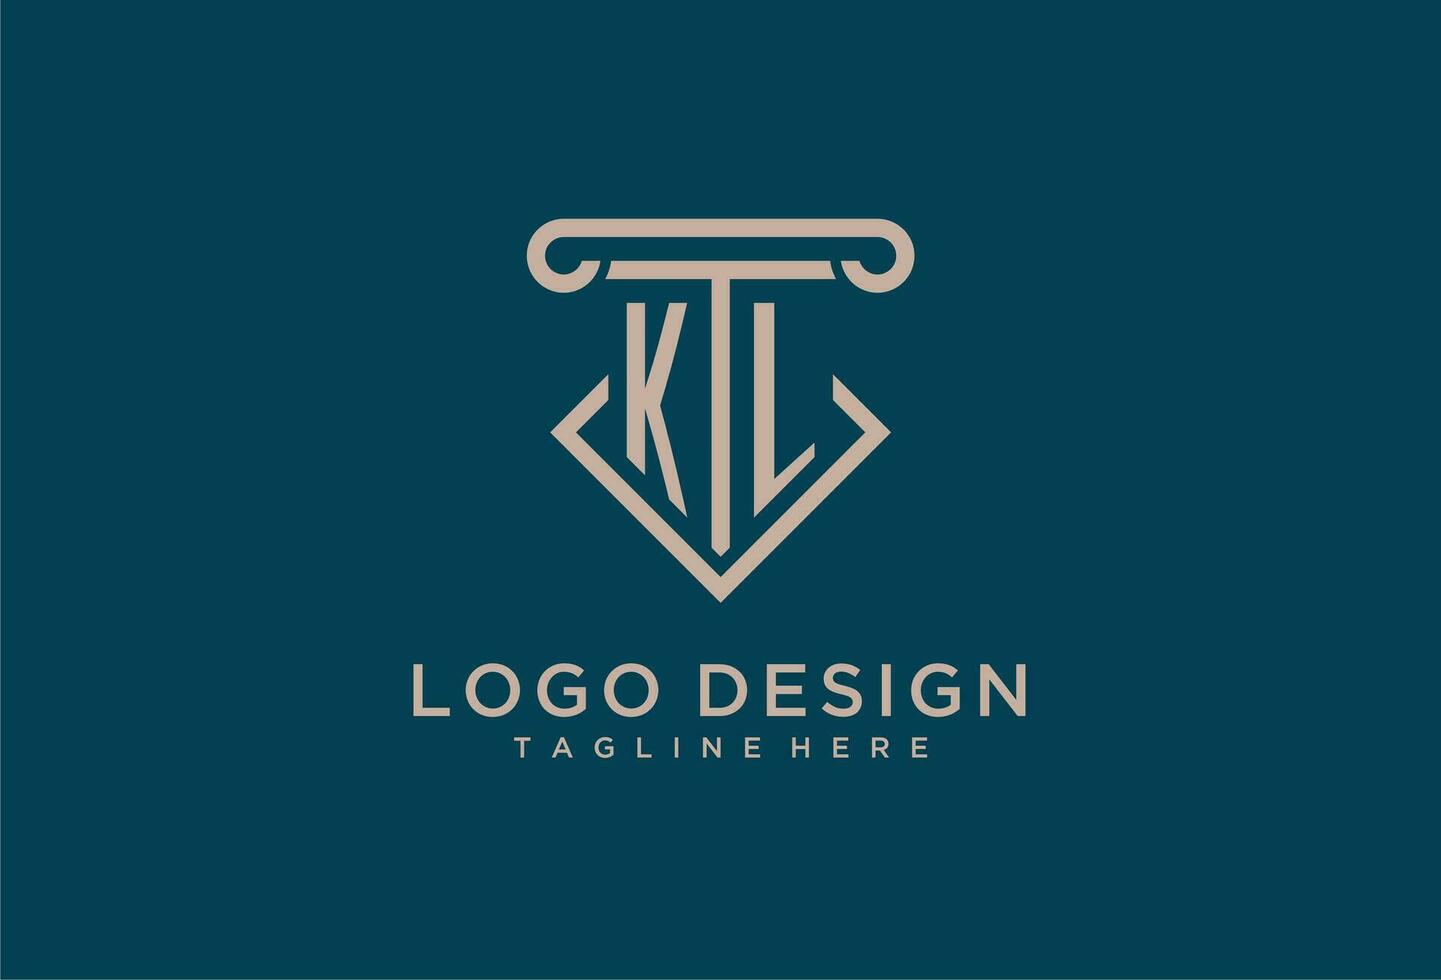 KL initial with pillar icon design, clean and modern attorney, legal firm logo vector